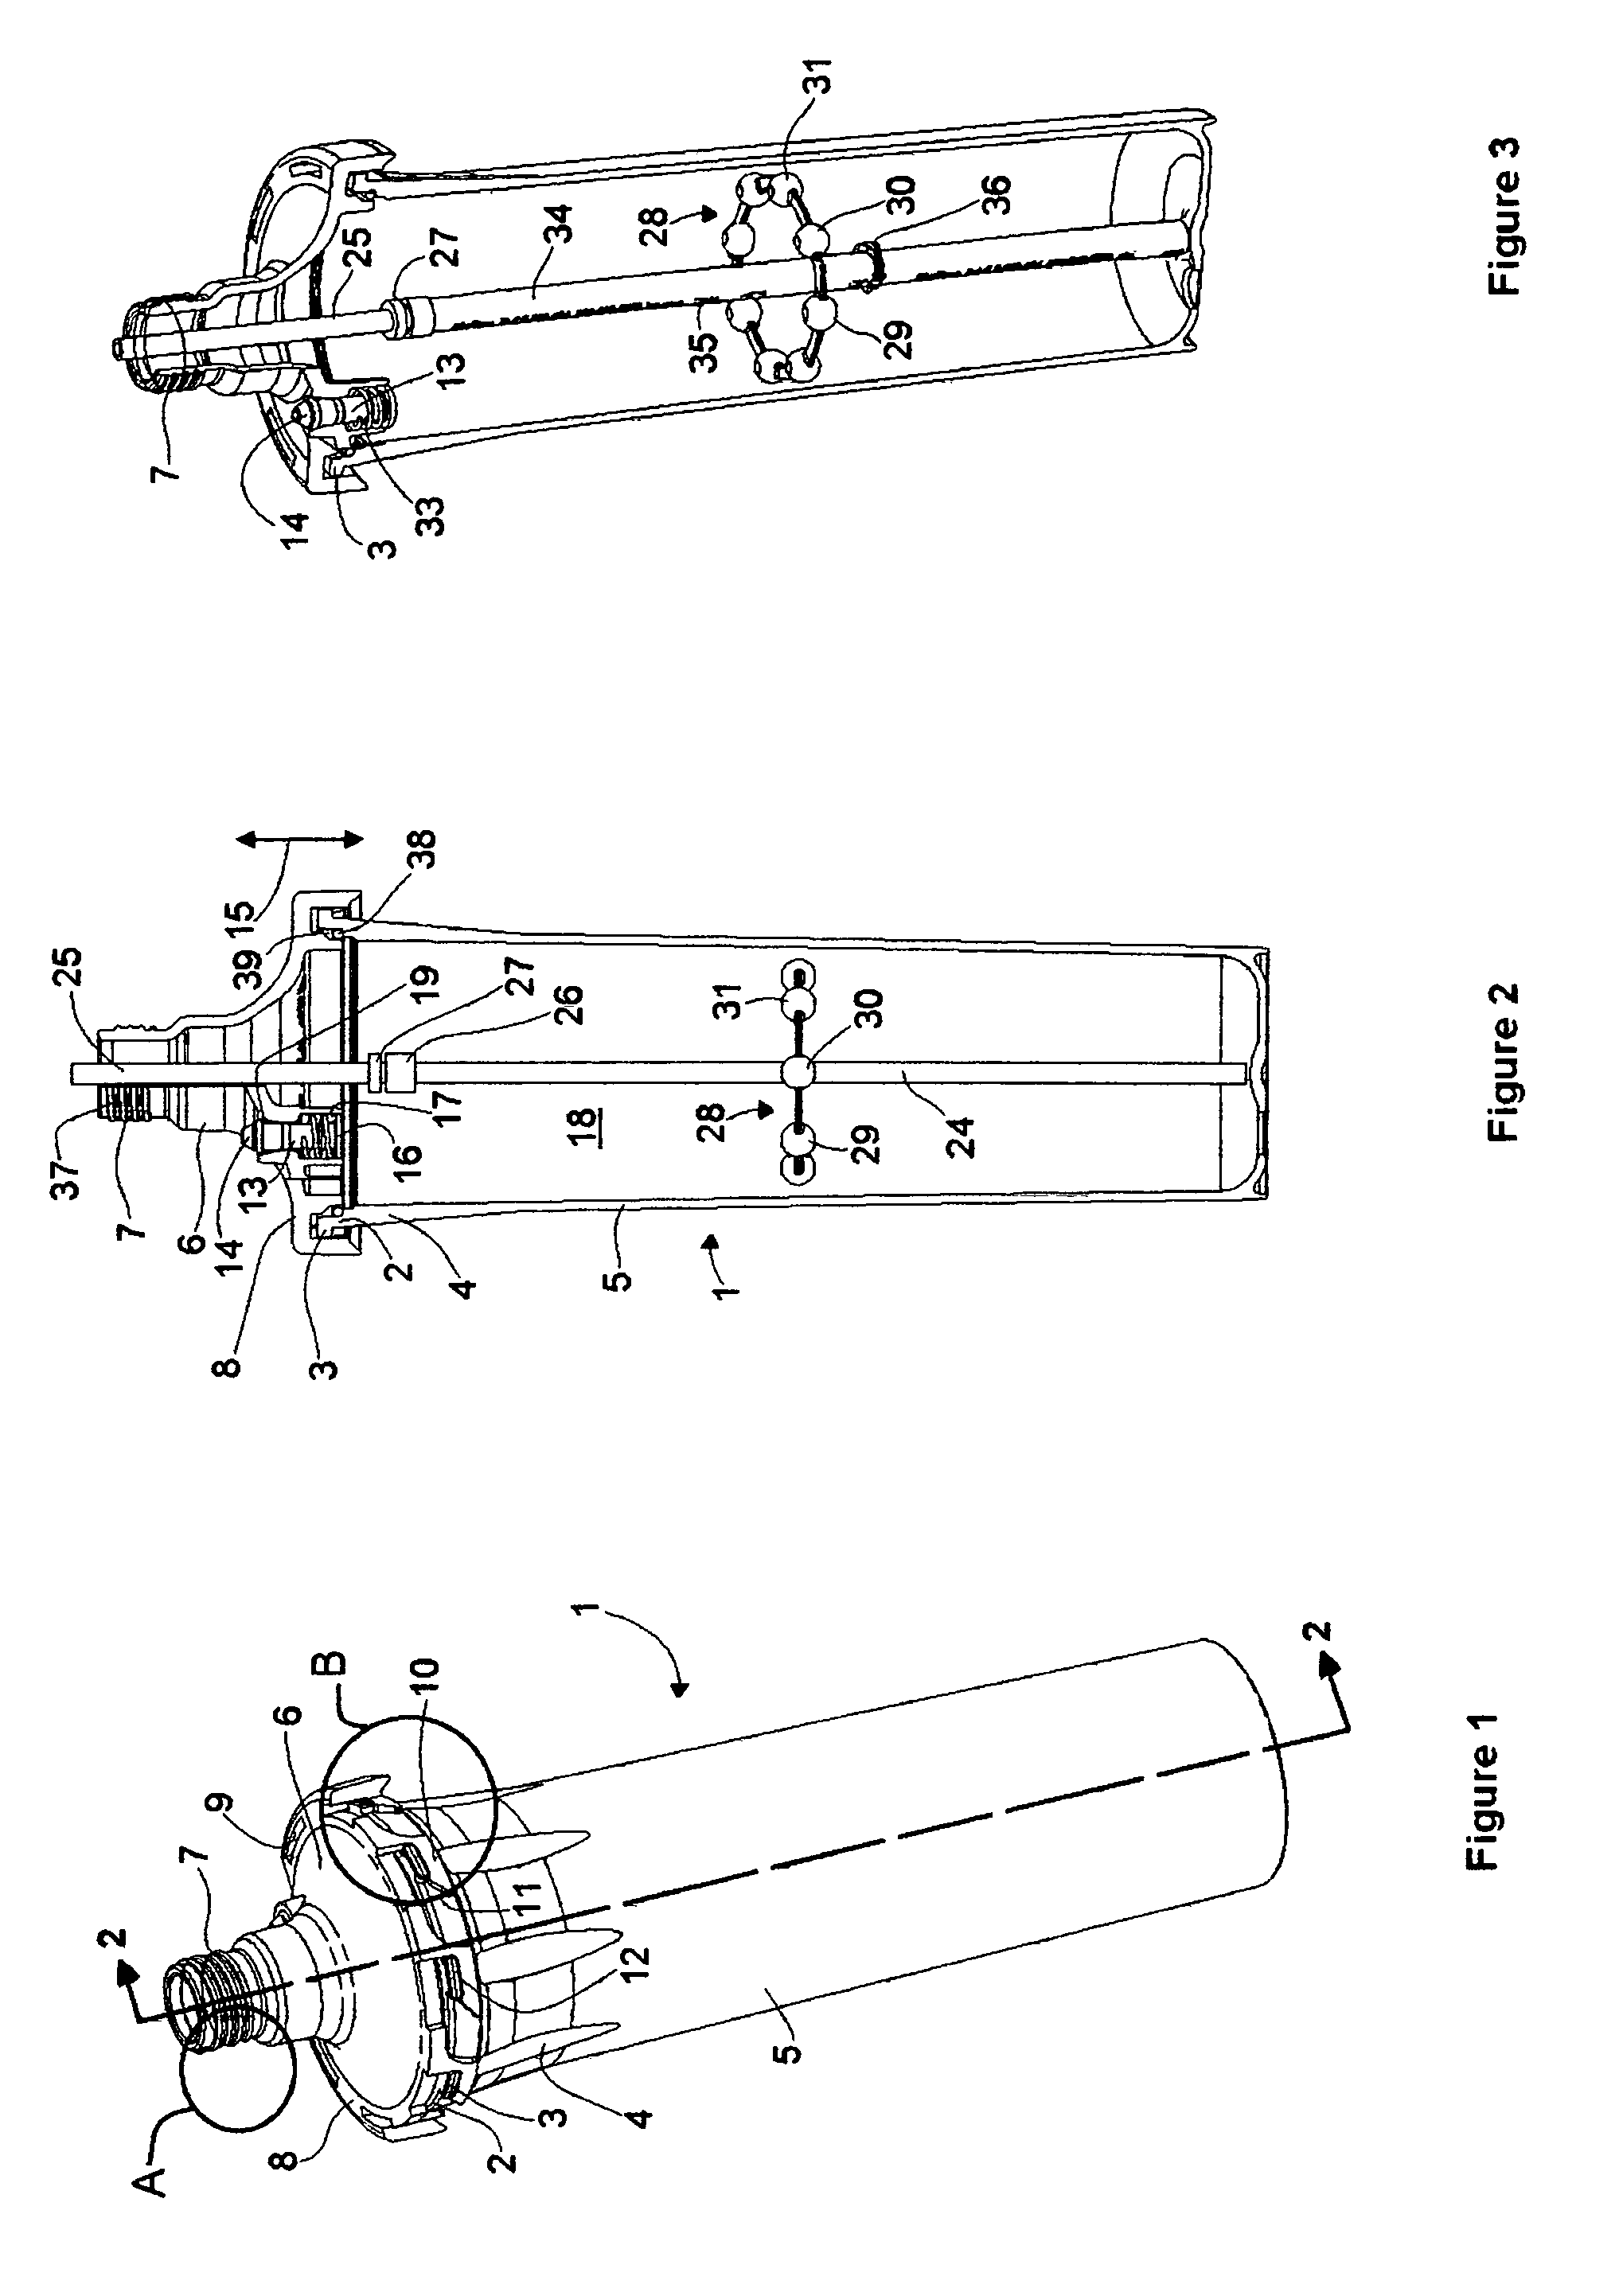 Water bottle system for use in a dental operatory